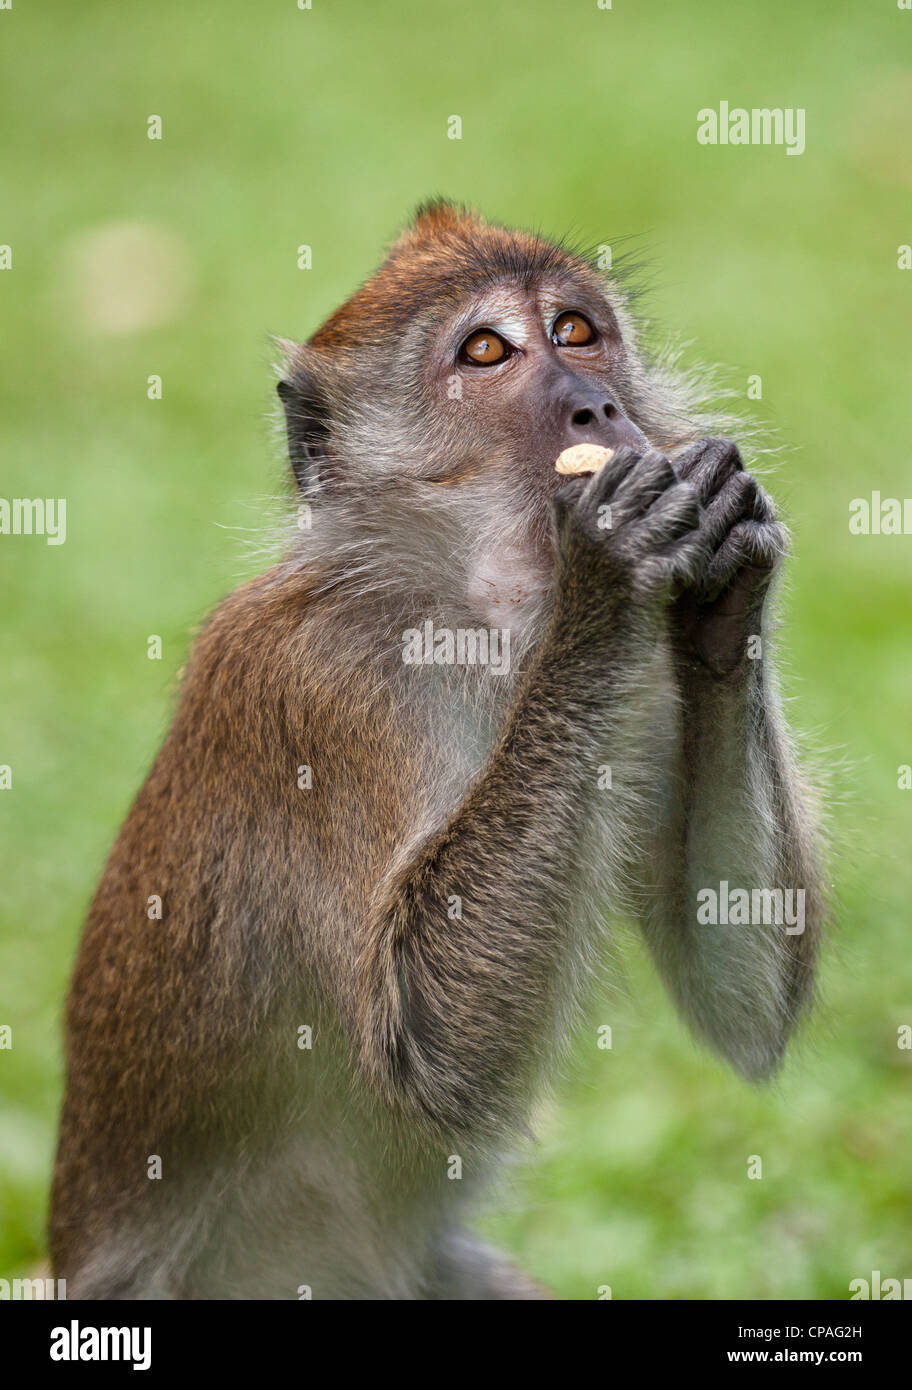 a small macaque monkey in penang malaysia Stock Photo